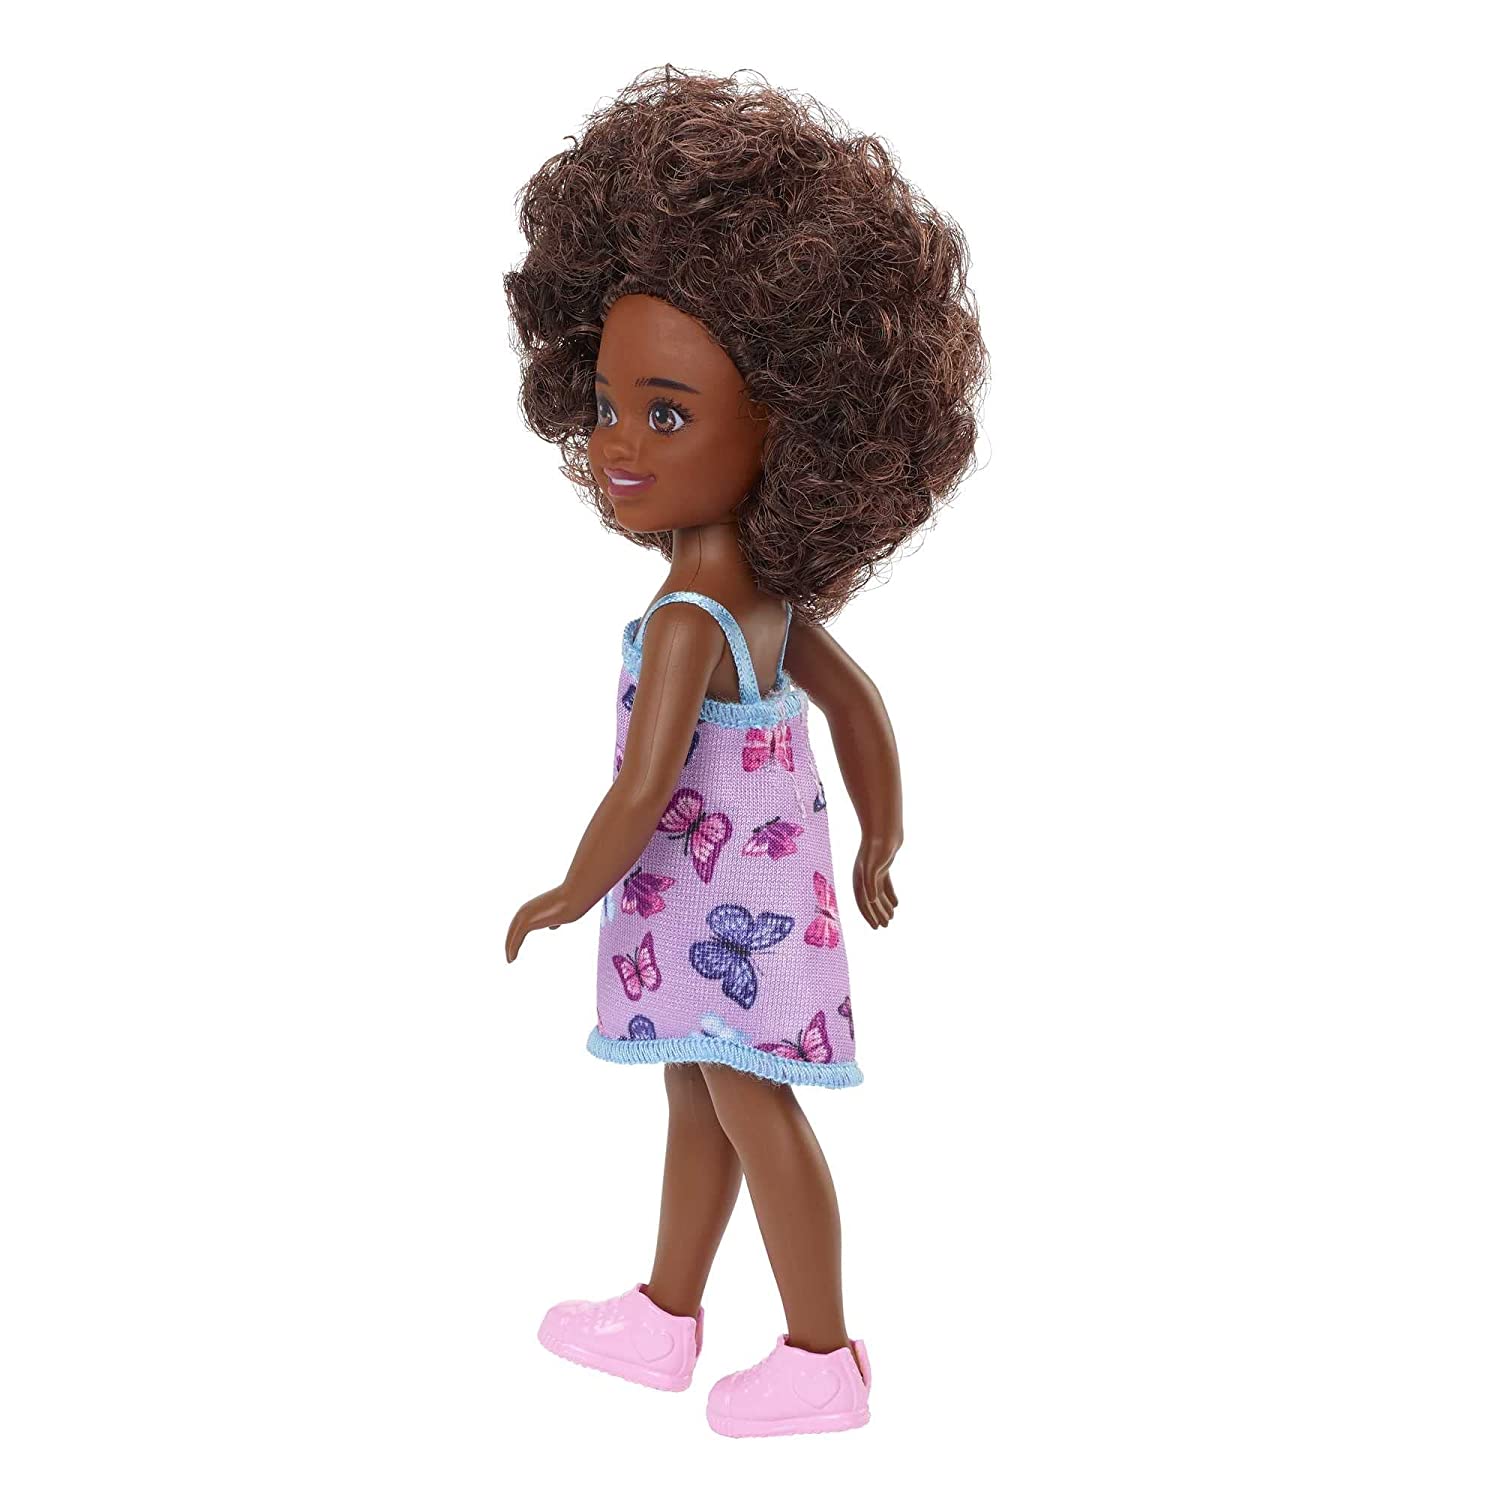 Barbie Chelsea 6 Inch Doll Curly Brunette Hair Wearing Butterfly-Print Dress and Pink Shoes for Kids Ages 3 Years Old & Up